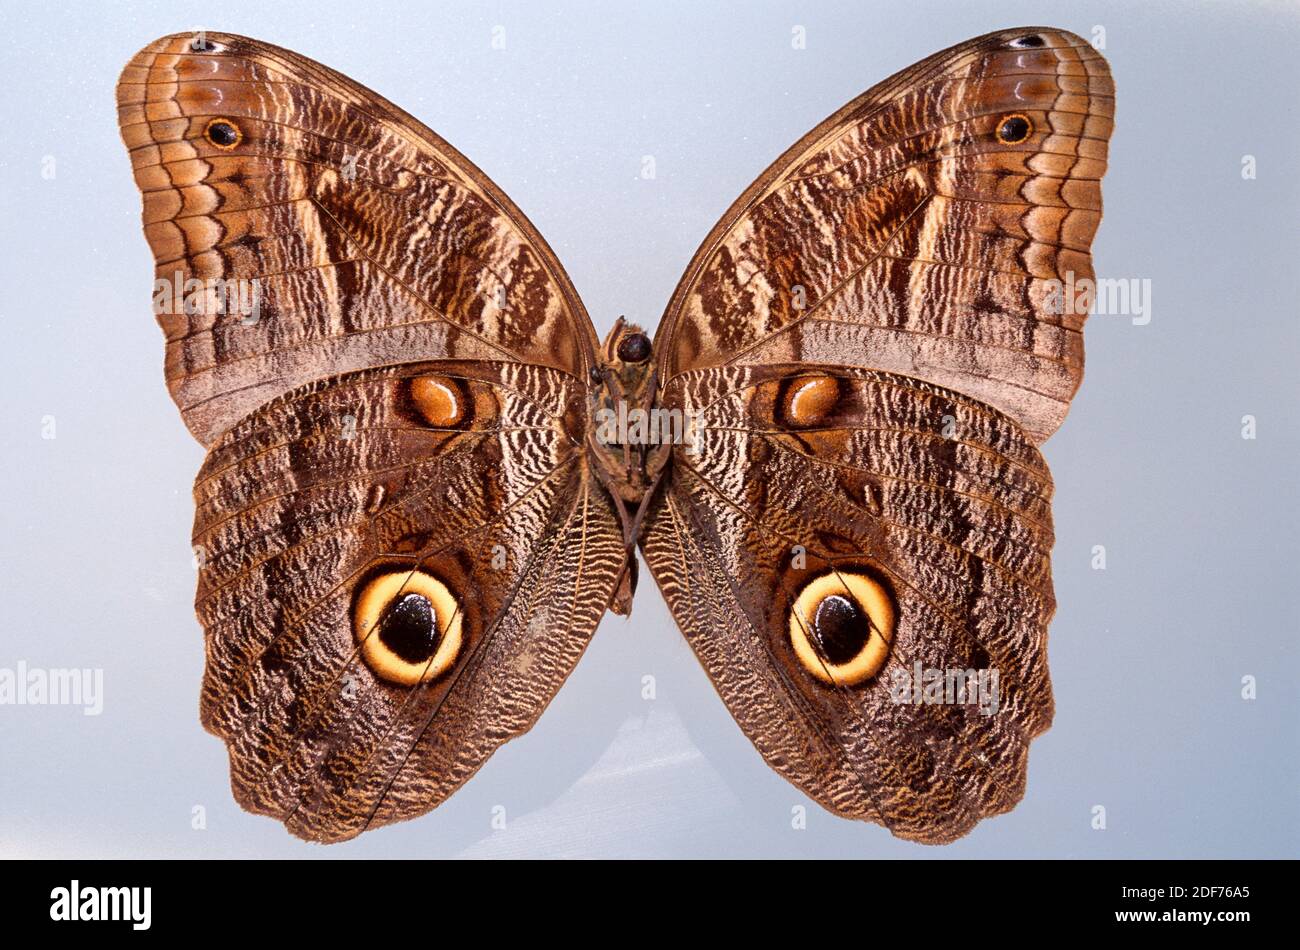 Brazilian owl or almond-eyed owl (Caligo brasiliensis) is a butterfly native to tropical America, from Mexico to Brazil. Stock Photo